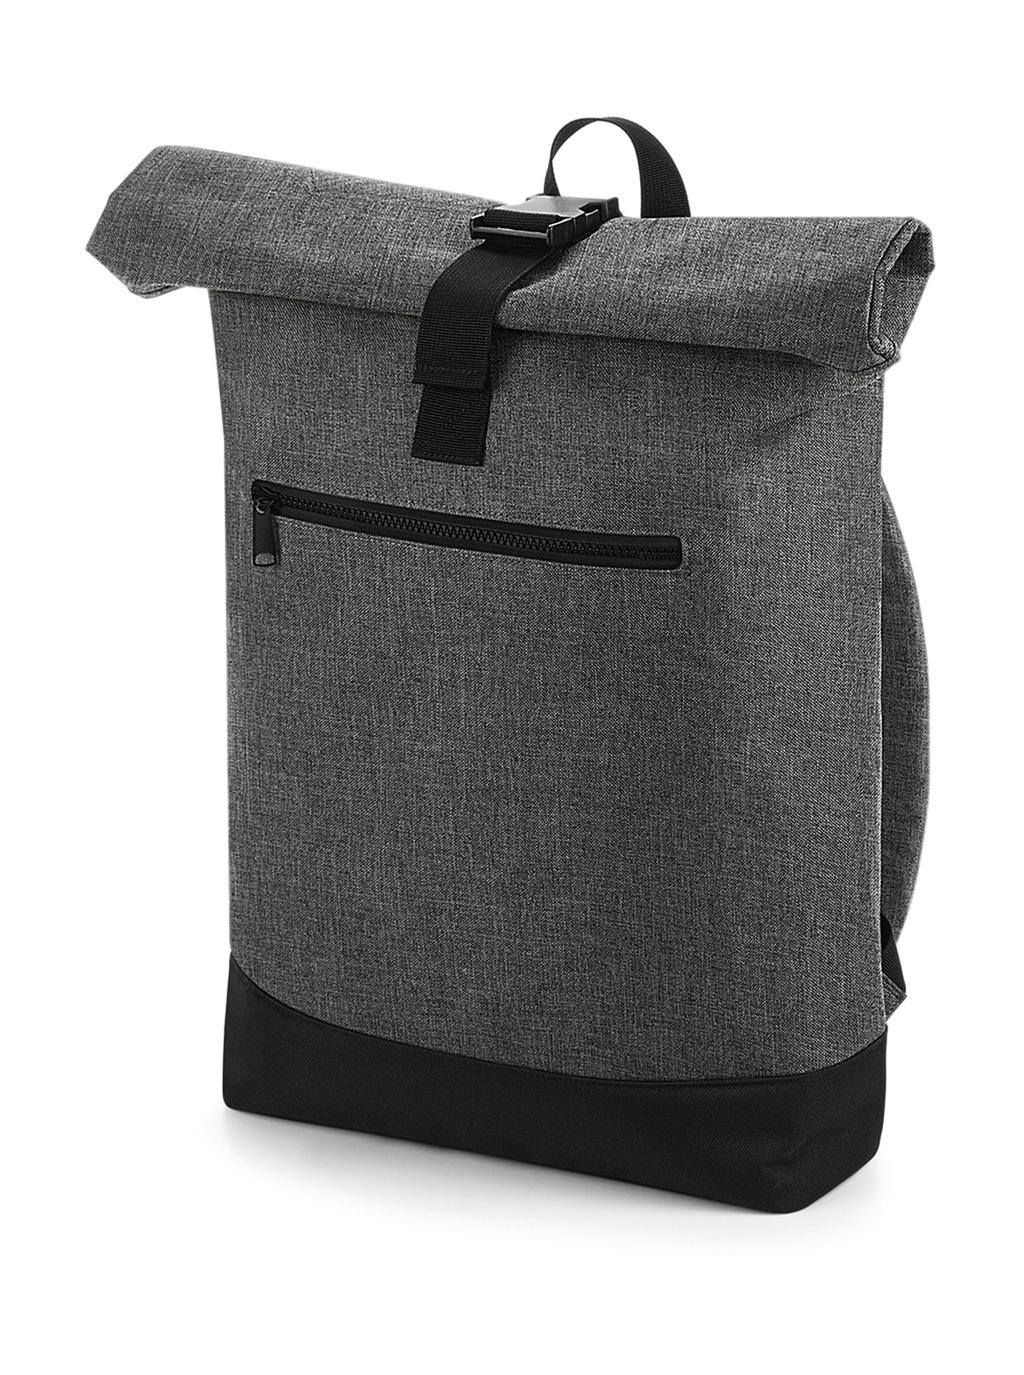  Roll-Top Backpack in Farbe Grey Marl/Black